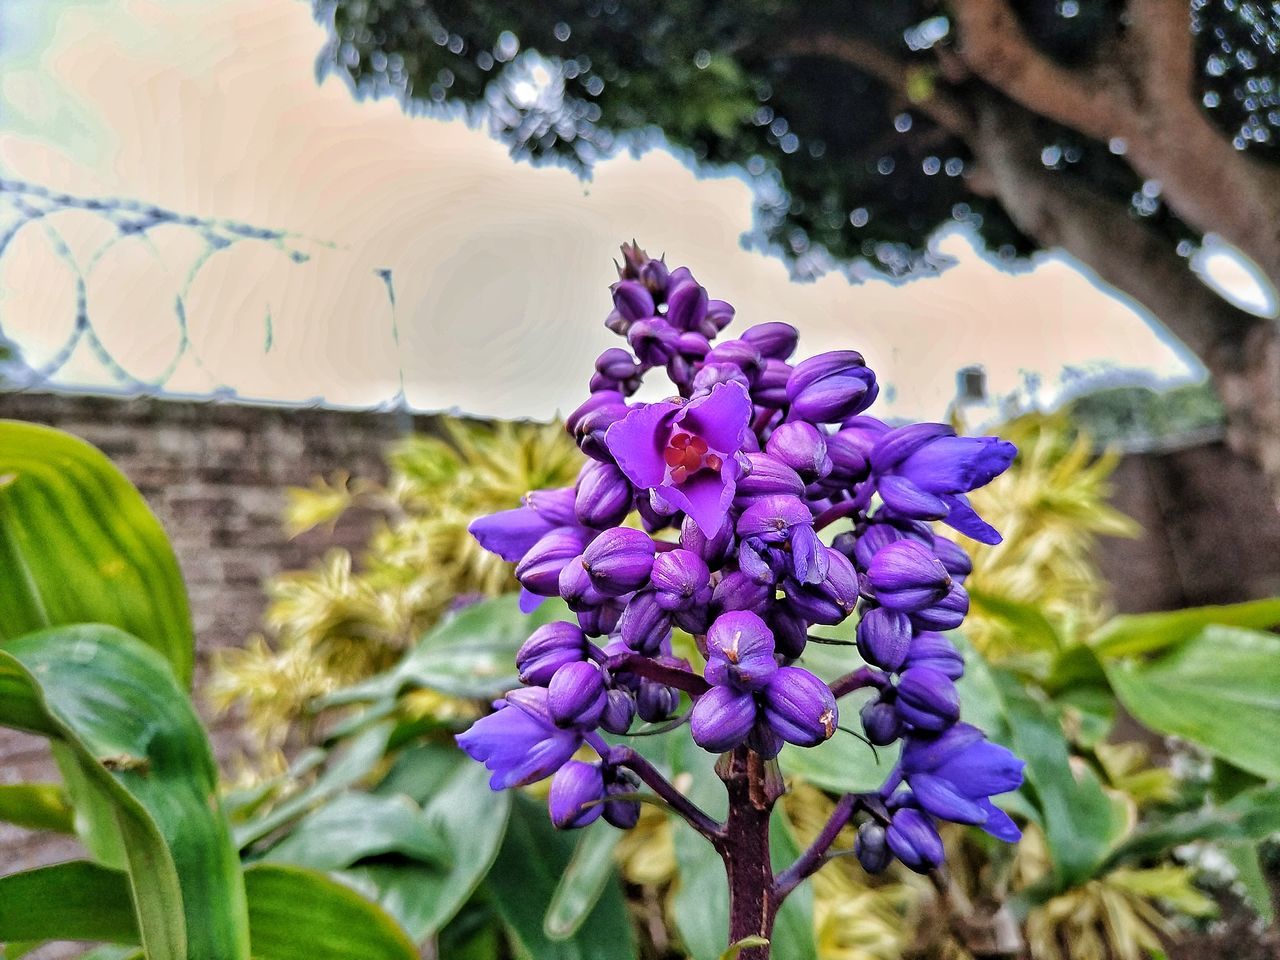 plant, flowering plant, flower, beauty in nature, freshness, nature, growth, purple, fragility, close-up, plant part, leaf, garden, focus on foreground, petal, no people, blossom, inflorescence, outdoors, day, flower head, wildflower, botany, springtime, tree, lilac